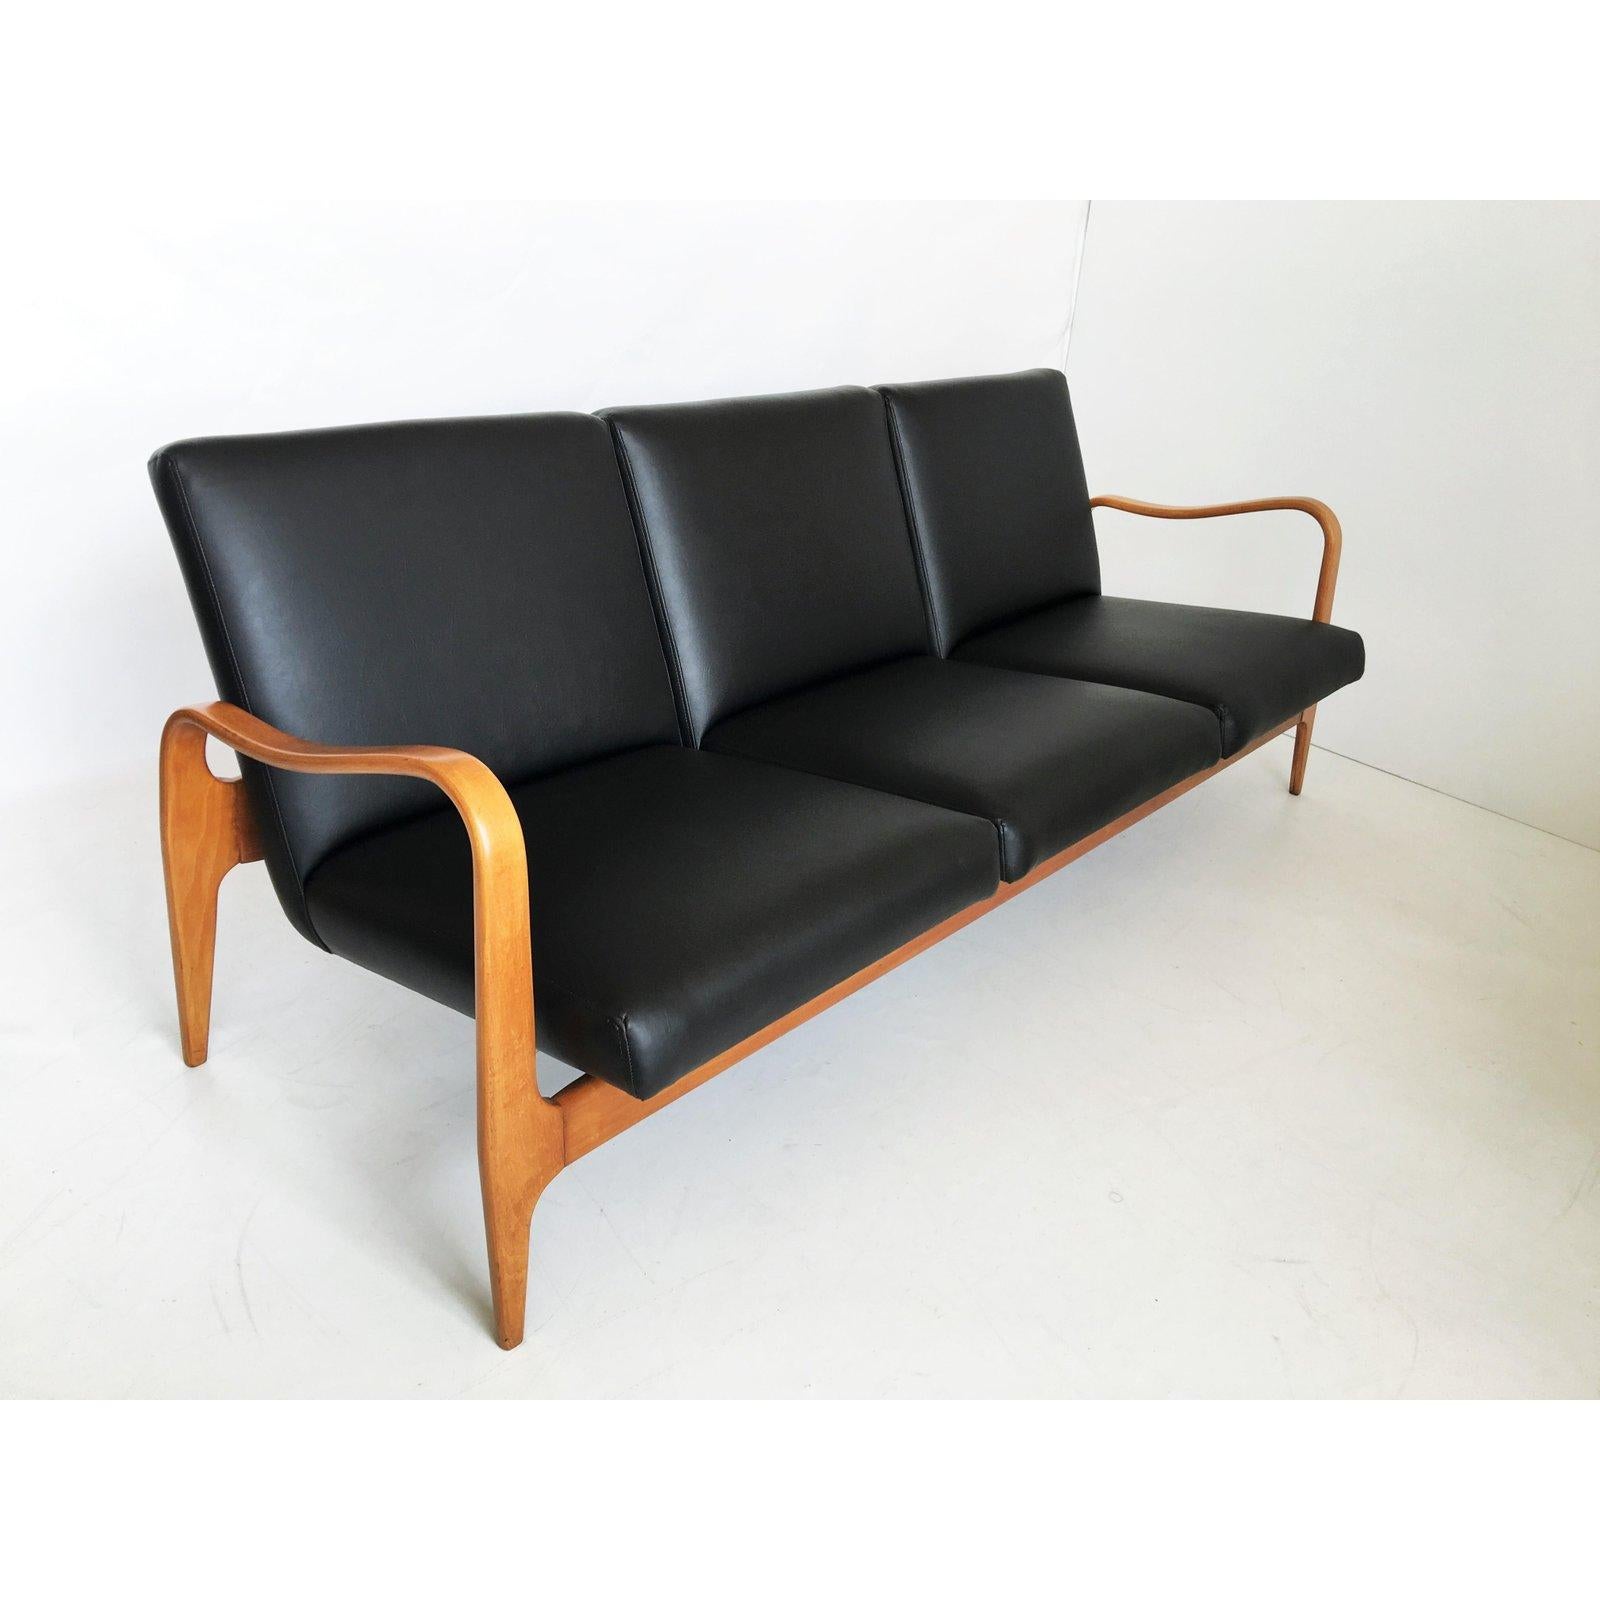 Mid-Century Modern Modernist Thonet Sculpted Bentwood Sofa For Sale